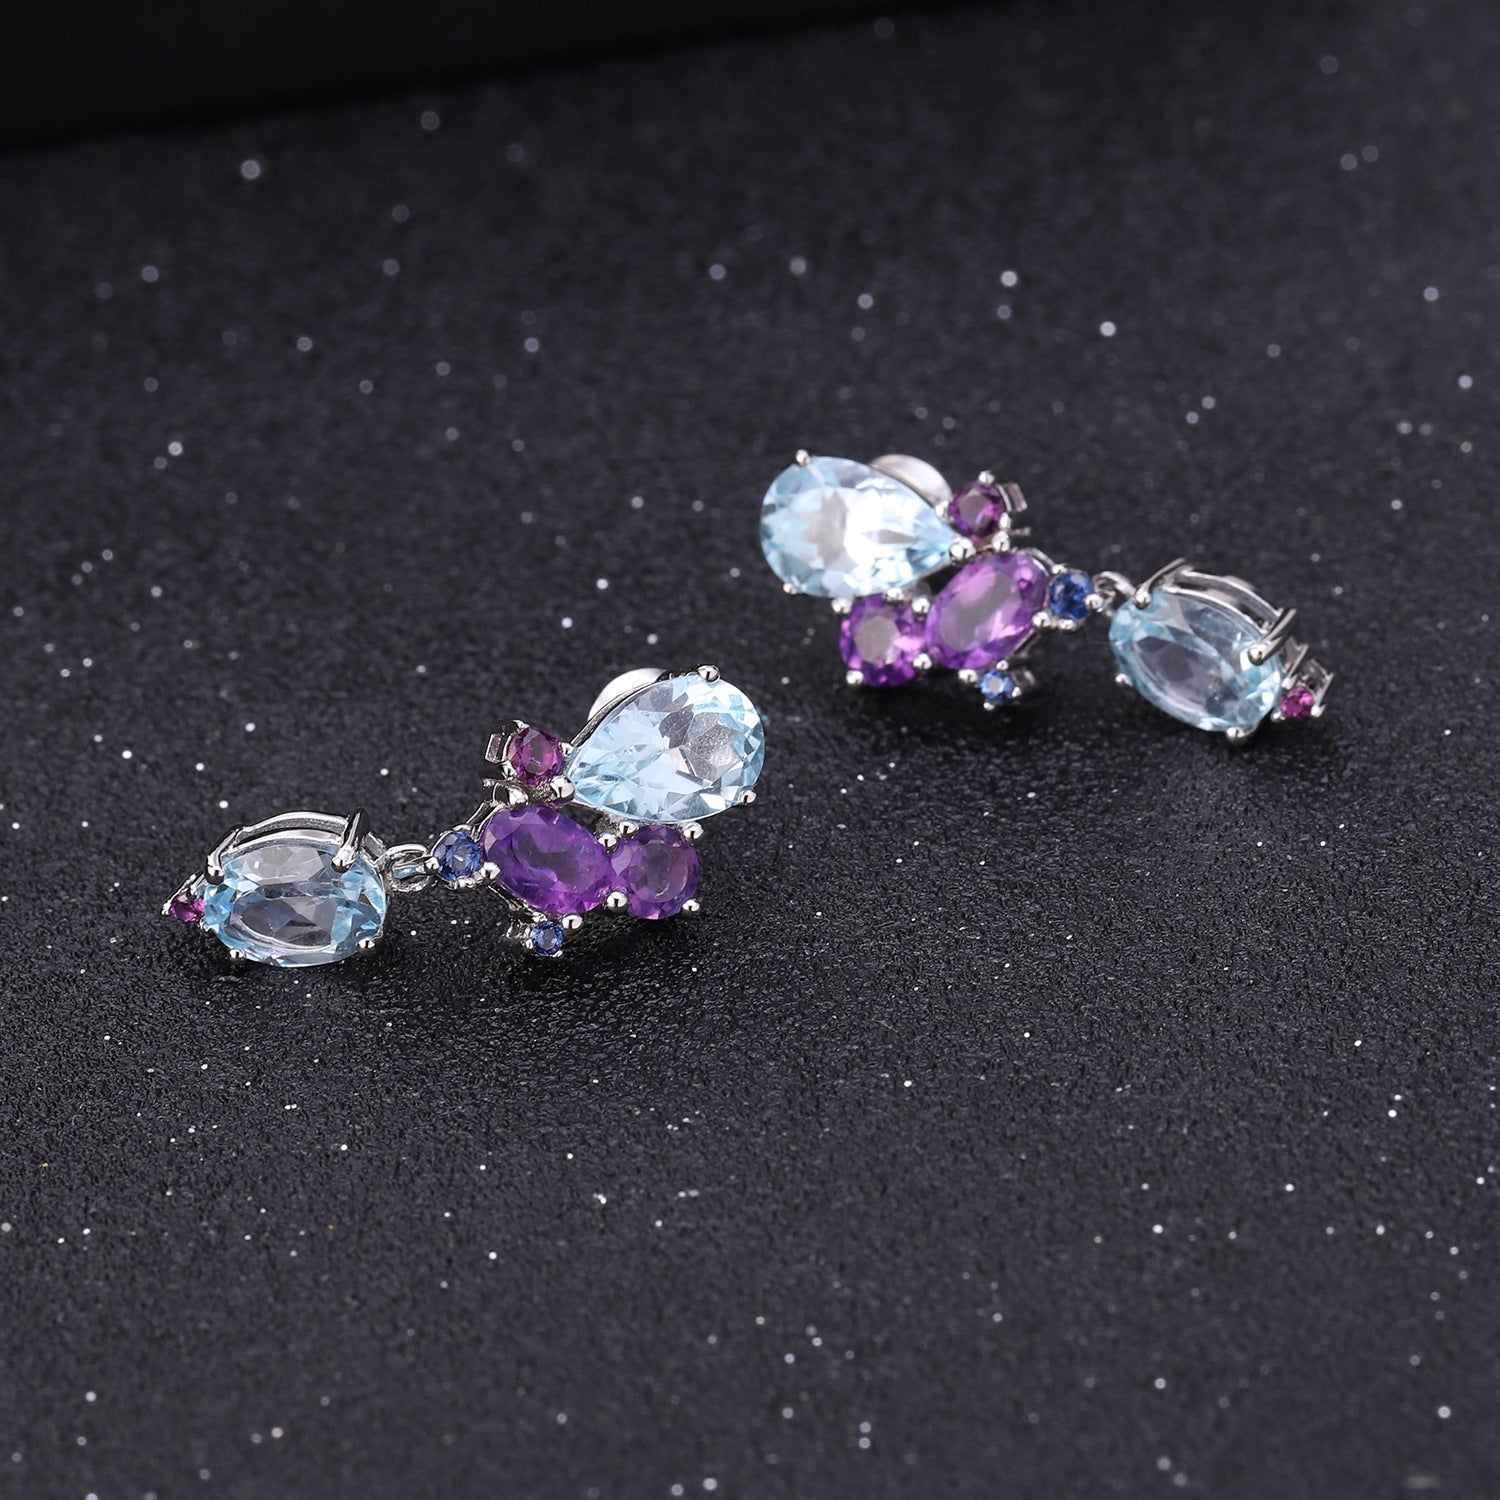 Luxury Design Inlaid Colourful Gemstones Creative Shape Silver Drop Earrings for Women